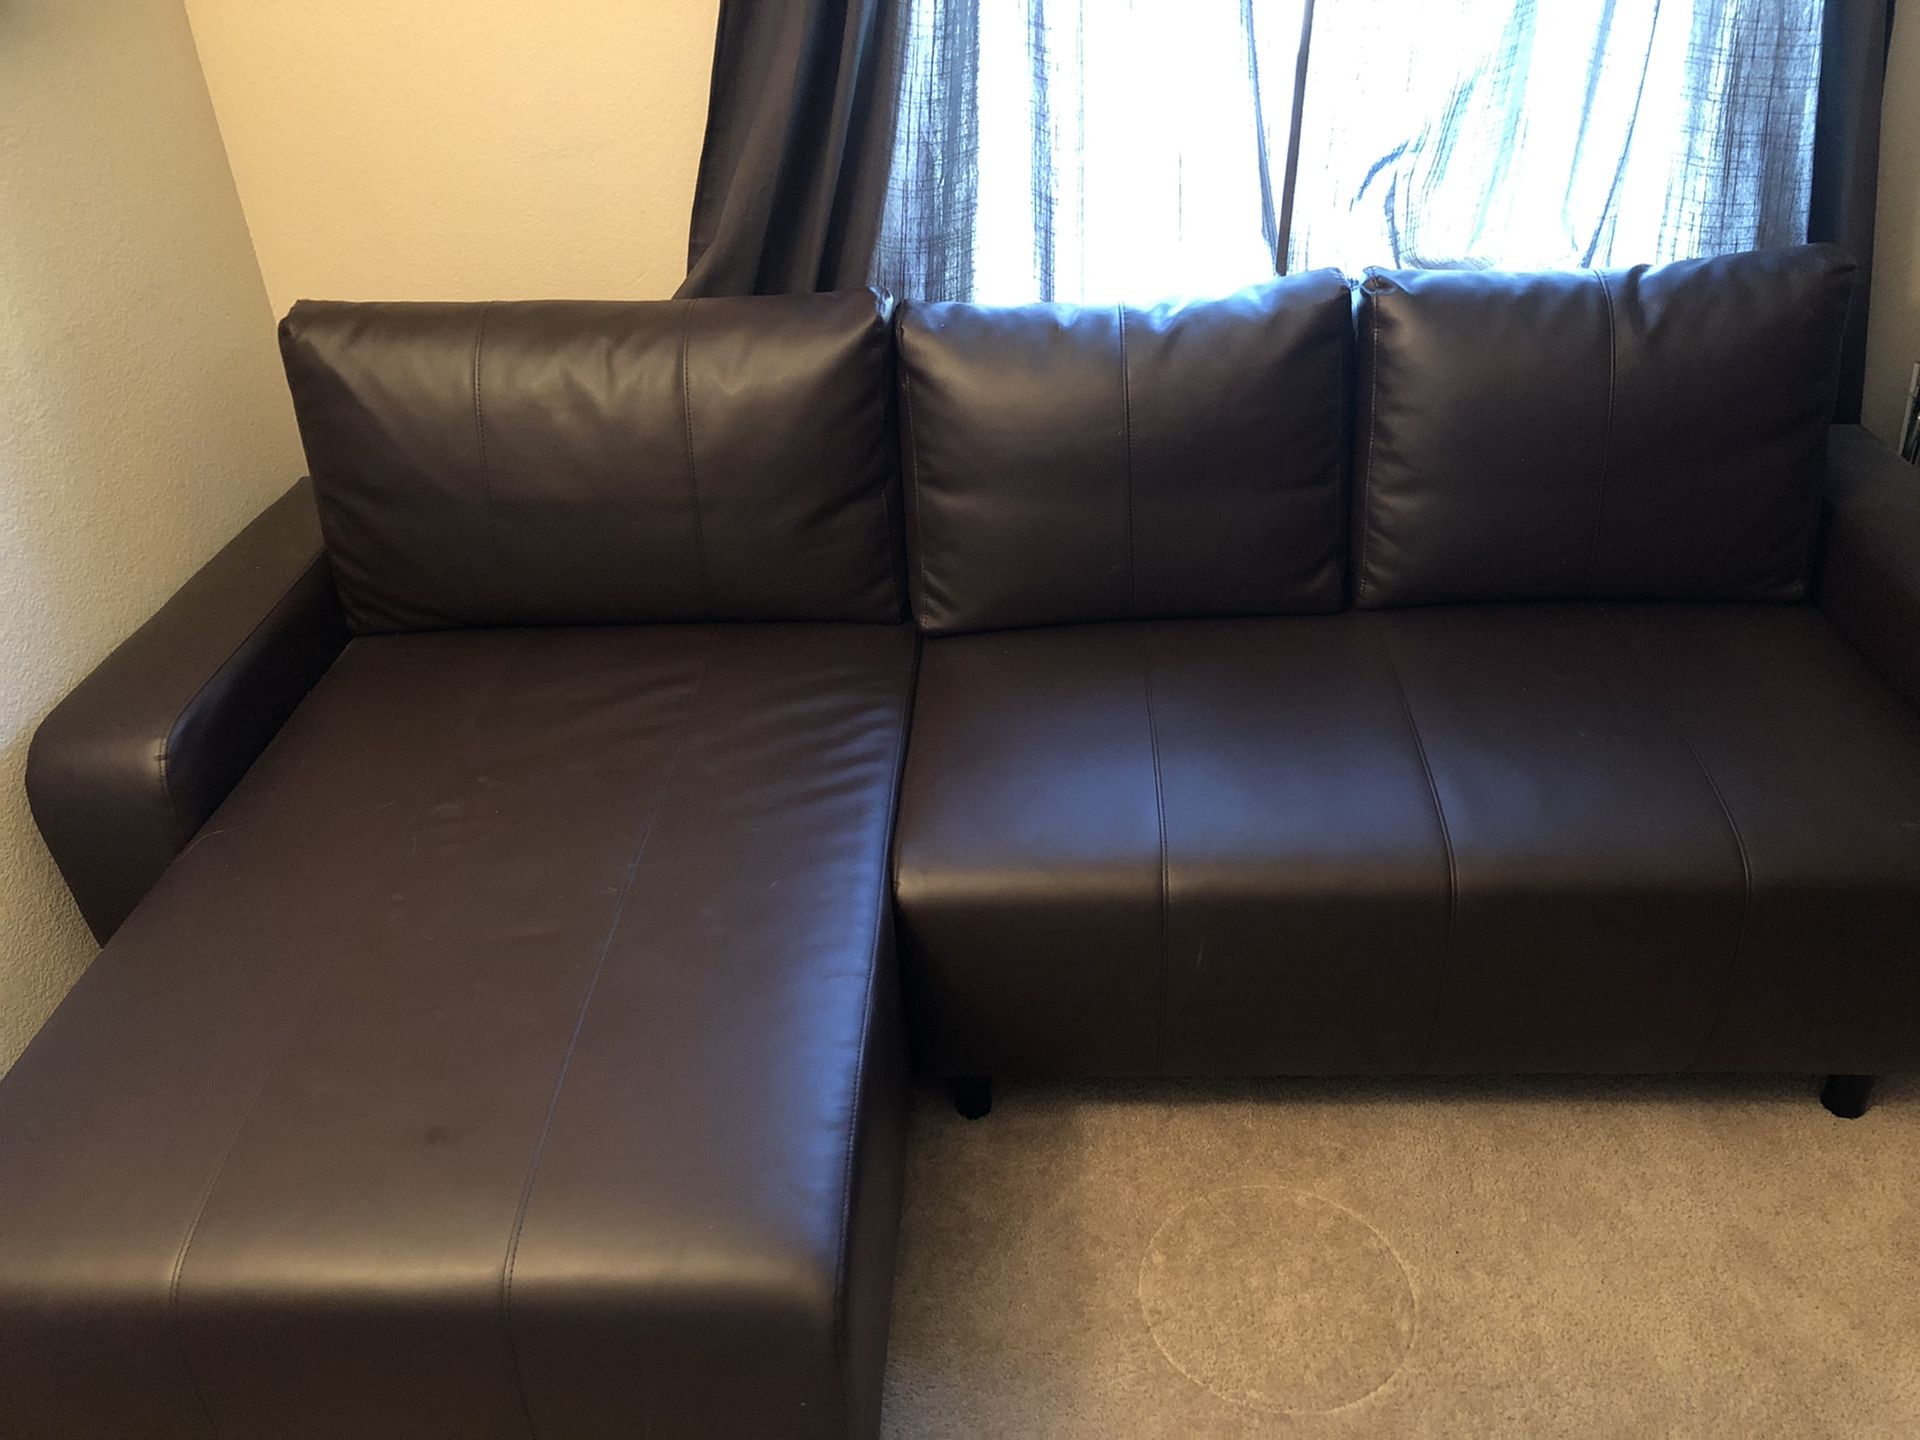 IKEA leather futon couch